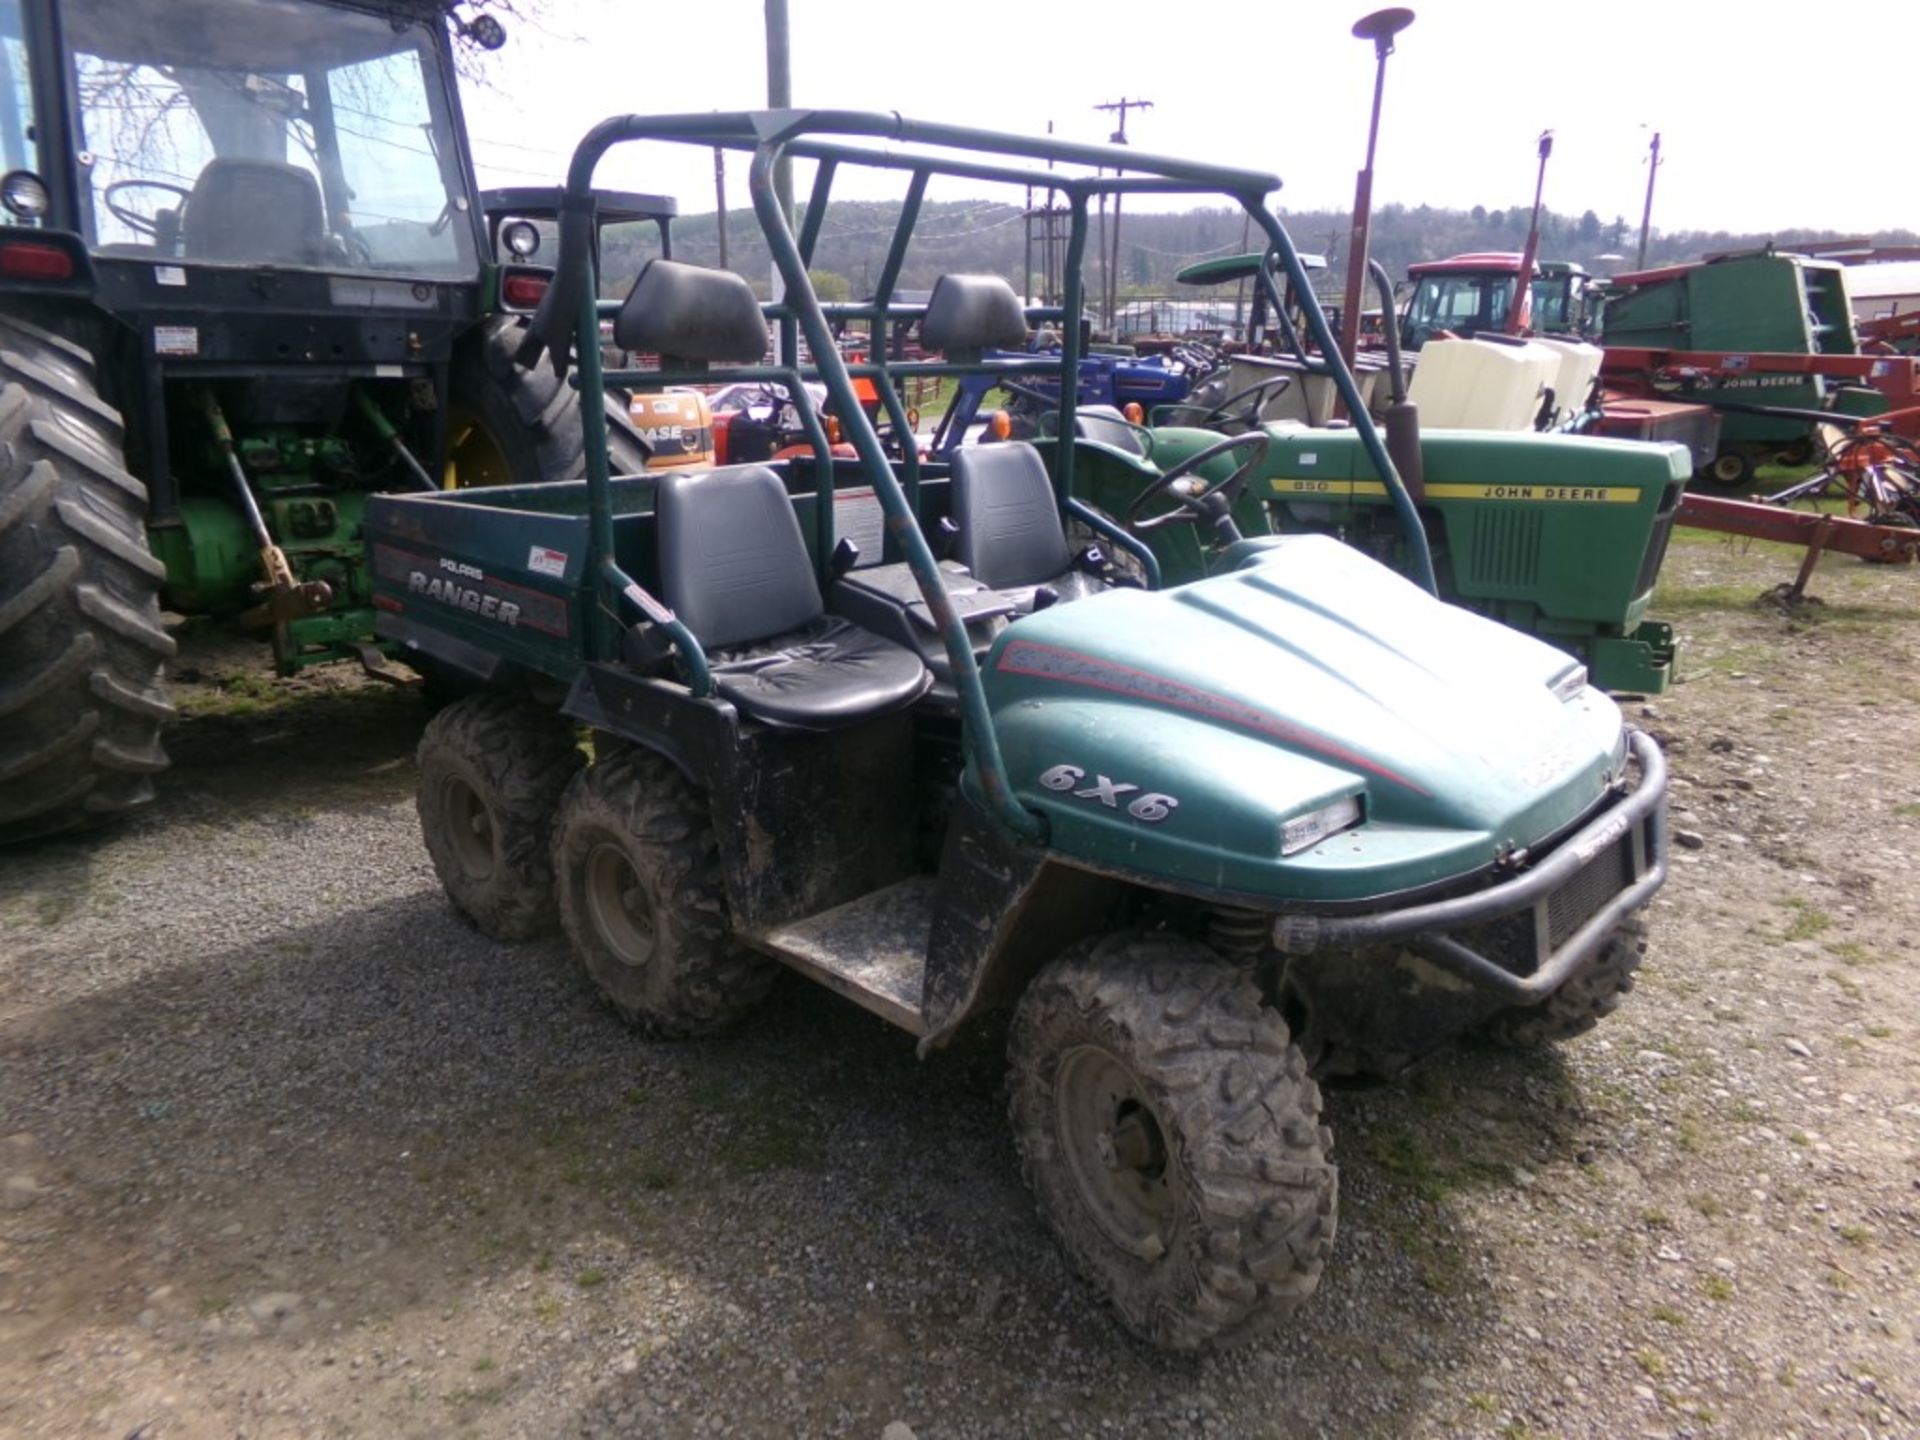 1998 Polaris Ranger 6 x 6, Engine Rebuilt, Less Than 100 Hrs on Engine, INPUT SIDE OF ENGINE IS - Image 2 of 2